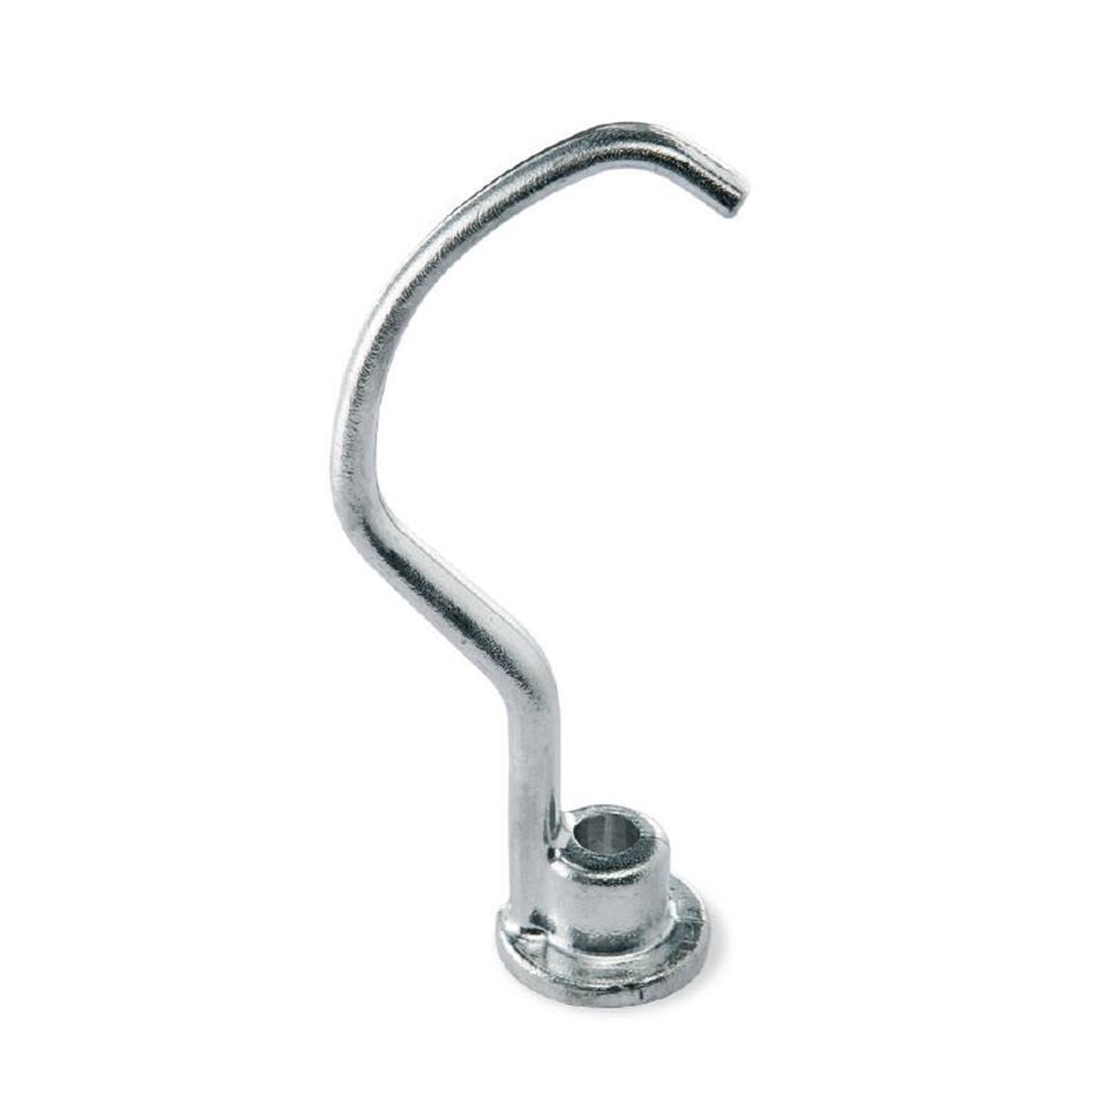 Electrolux Semi Spiral Hook Attachment for EMIX Planetary Mixer